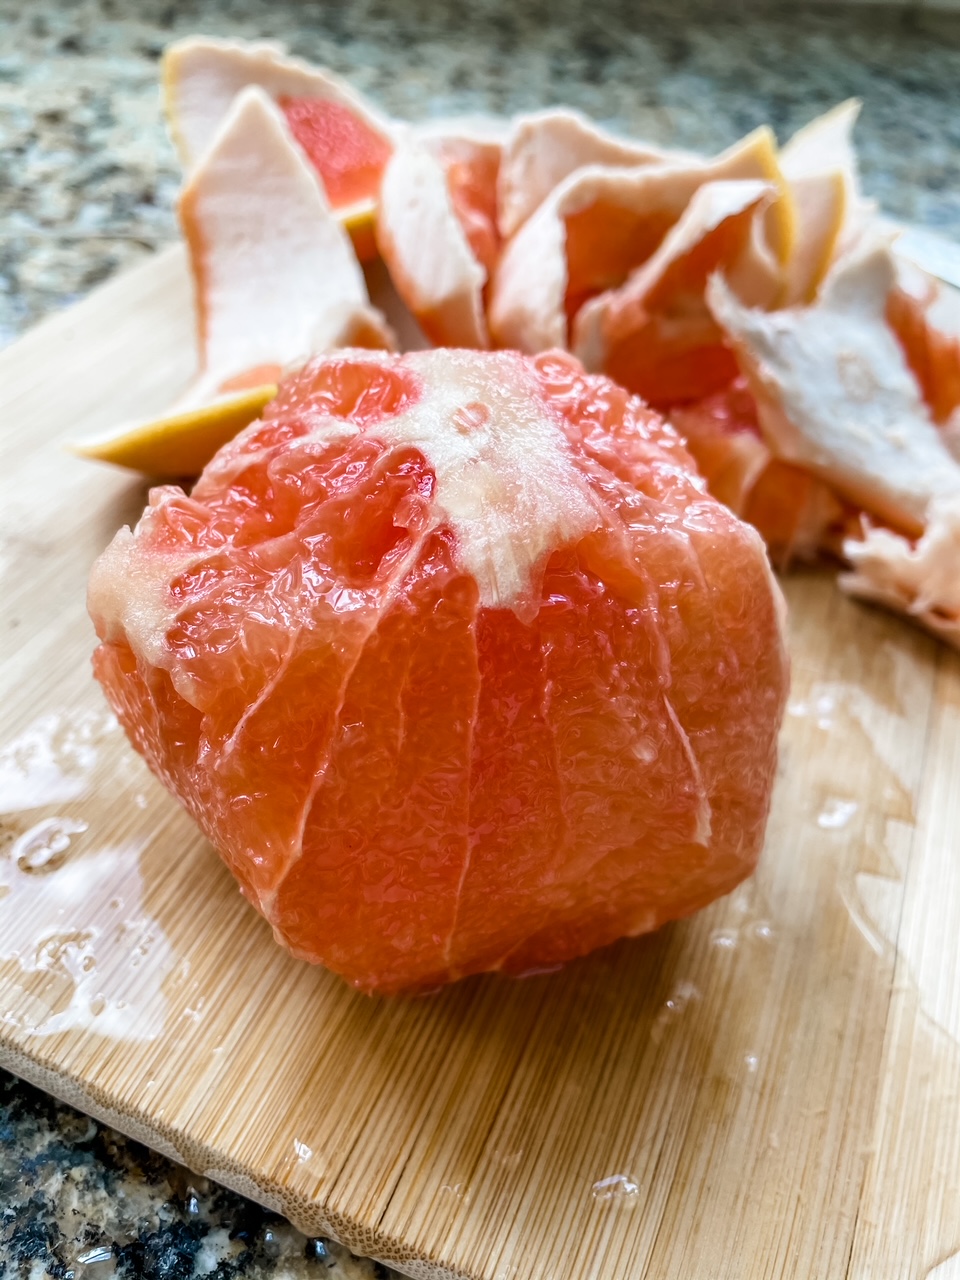 A partially completed grapefruit supreme that hasn't been separated from the membrane yet